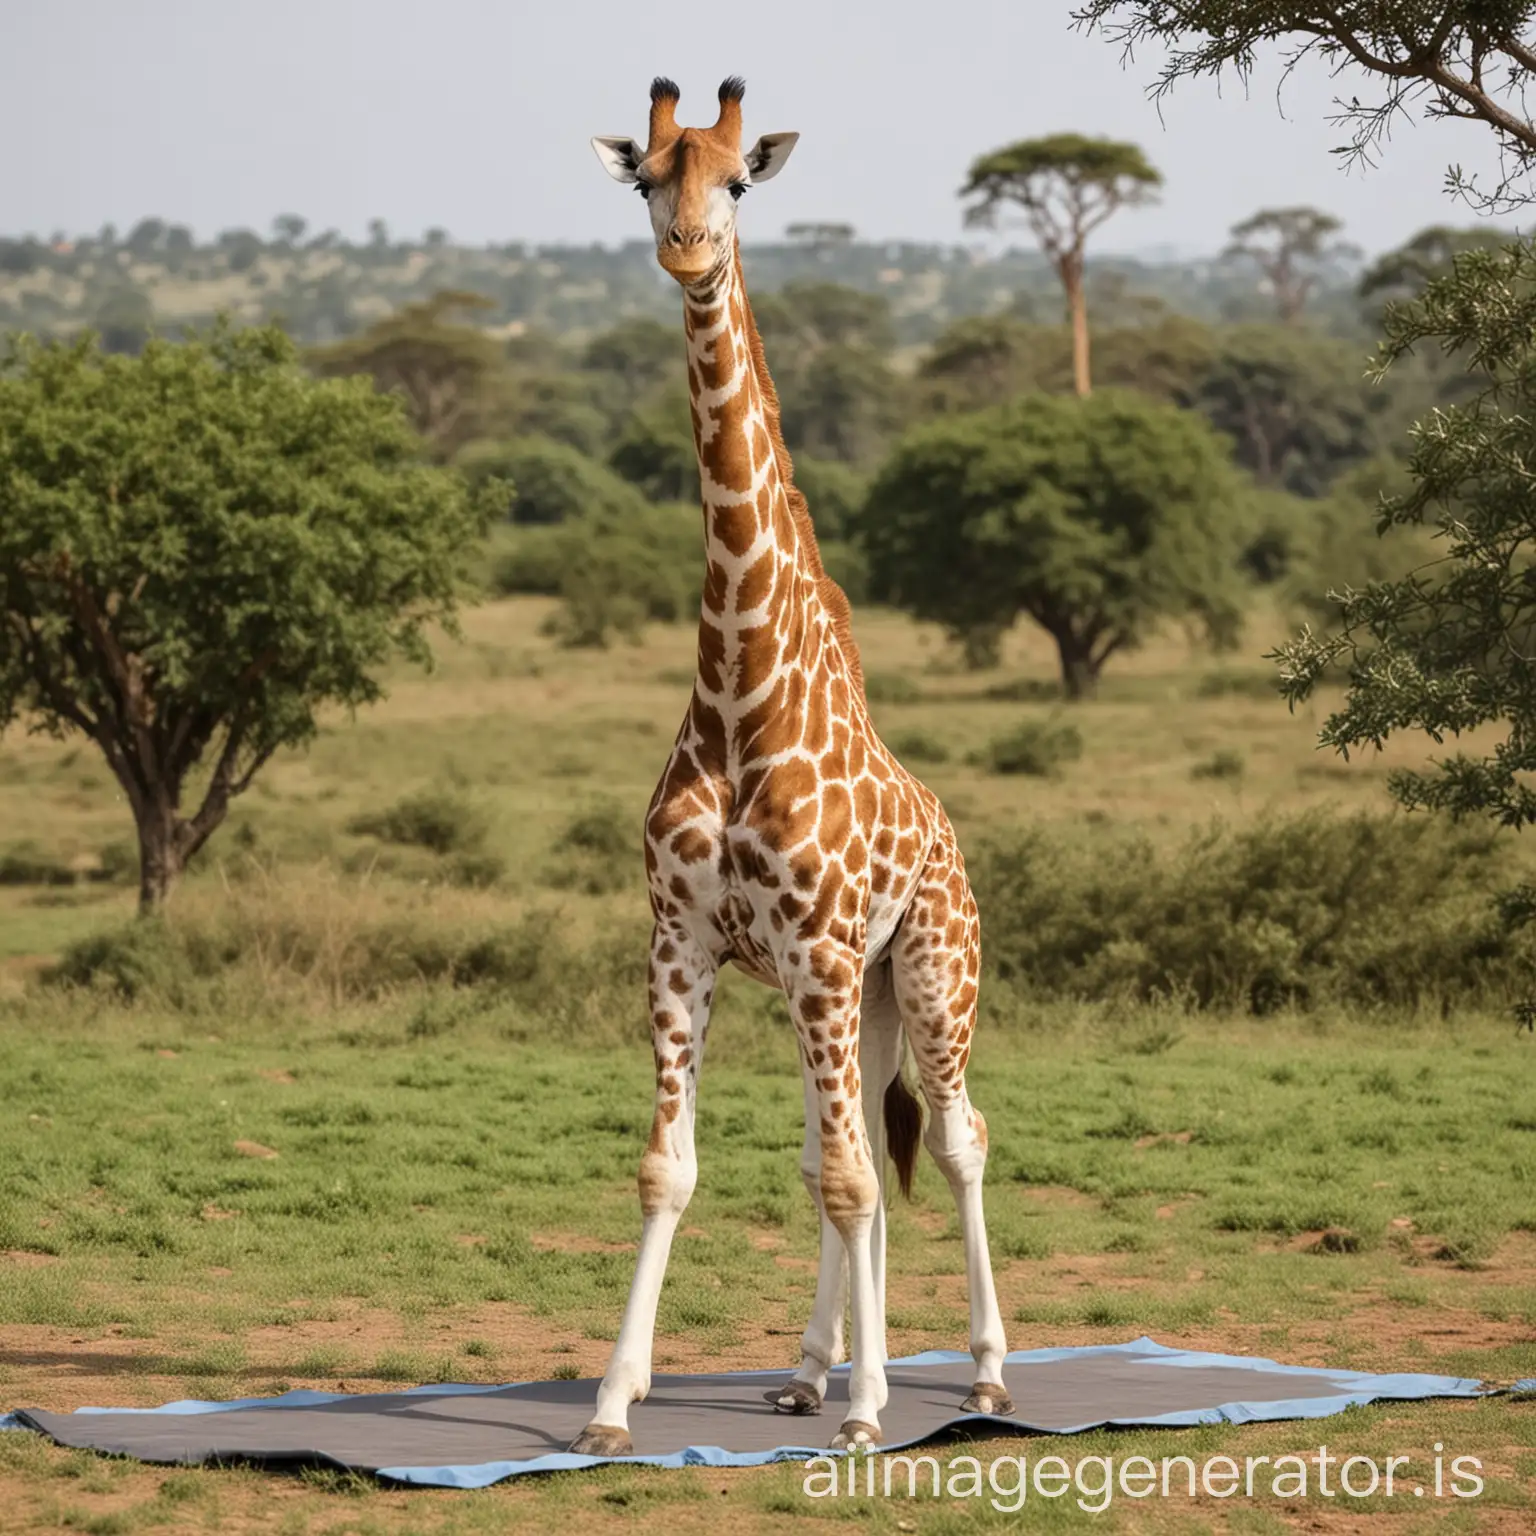 Graceful-Giraffe-Performing-Yoga-Pose-for-Health-and-Relaxation